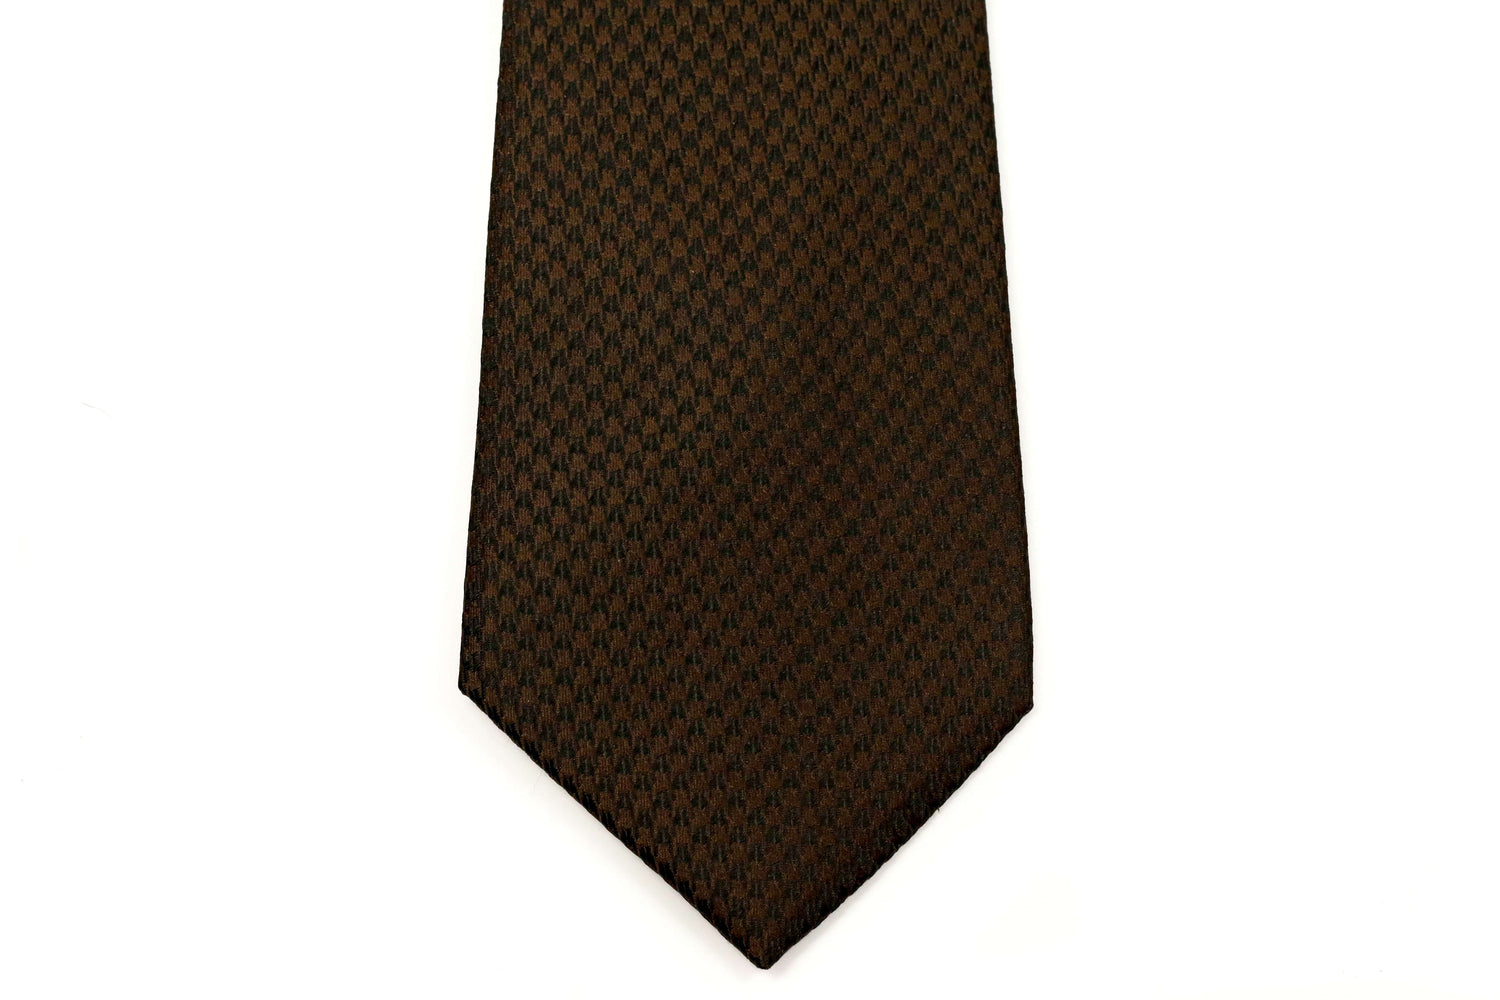 100% Silk Extra Long Tie - Brown and Black Houndstooth Pattern for Big and Tall Men